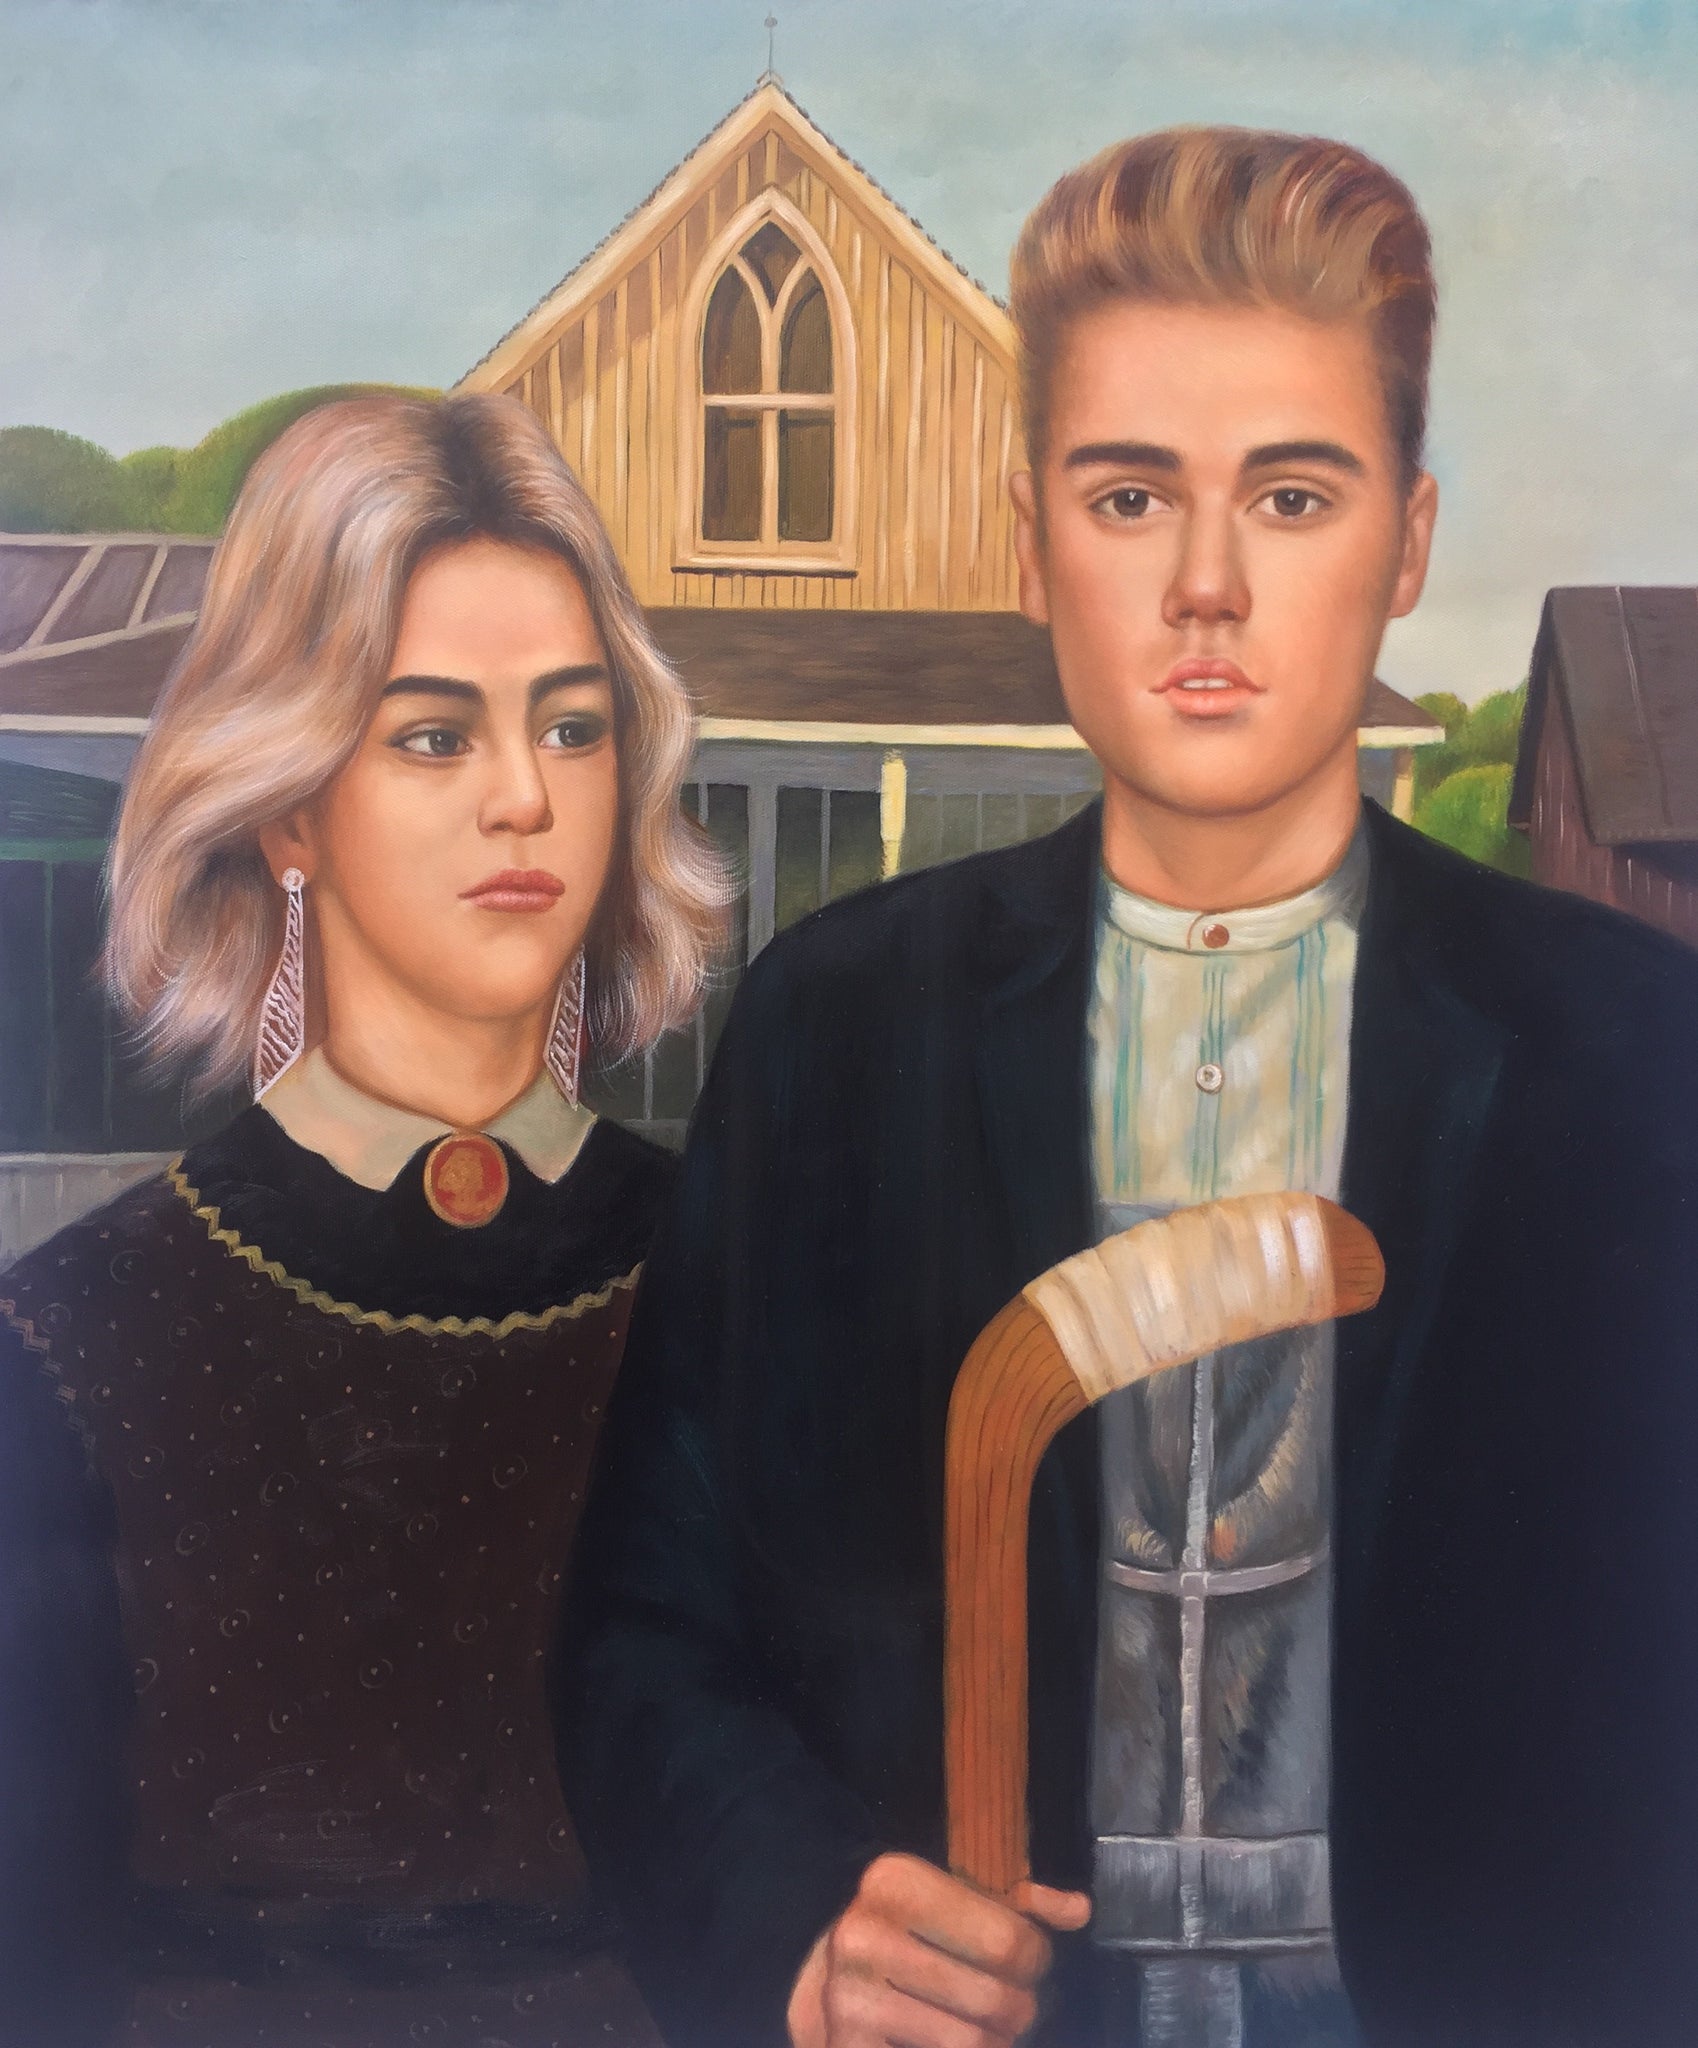 New Oil Painting Celebrates Bieber-Gomez Reunion, ‘American Gothic’ Style